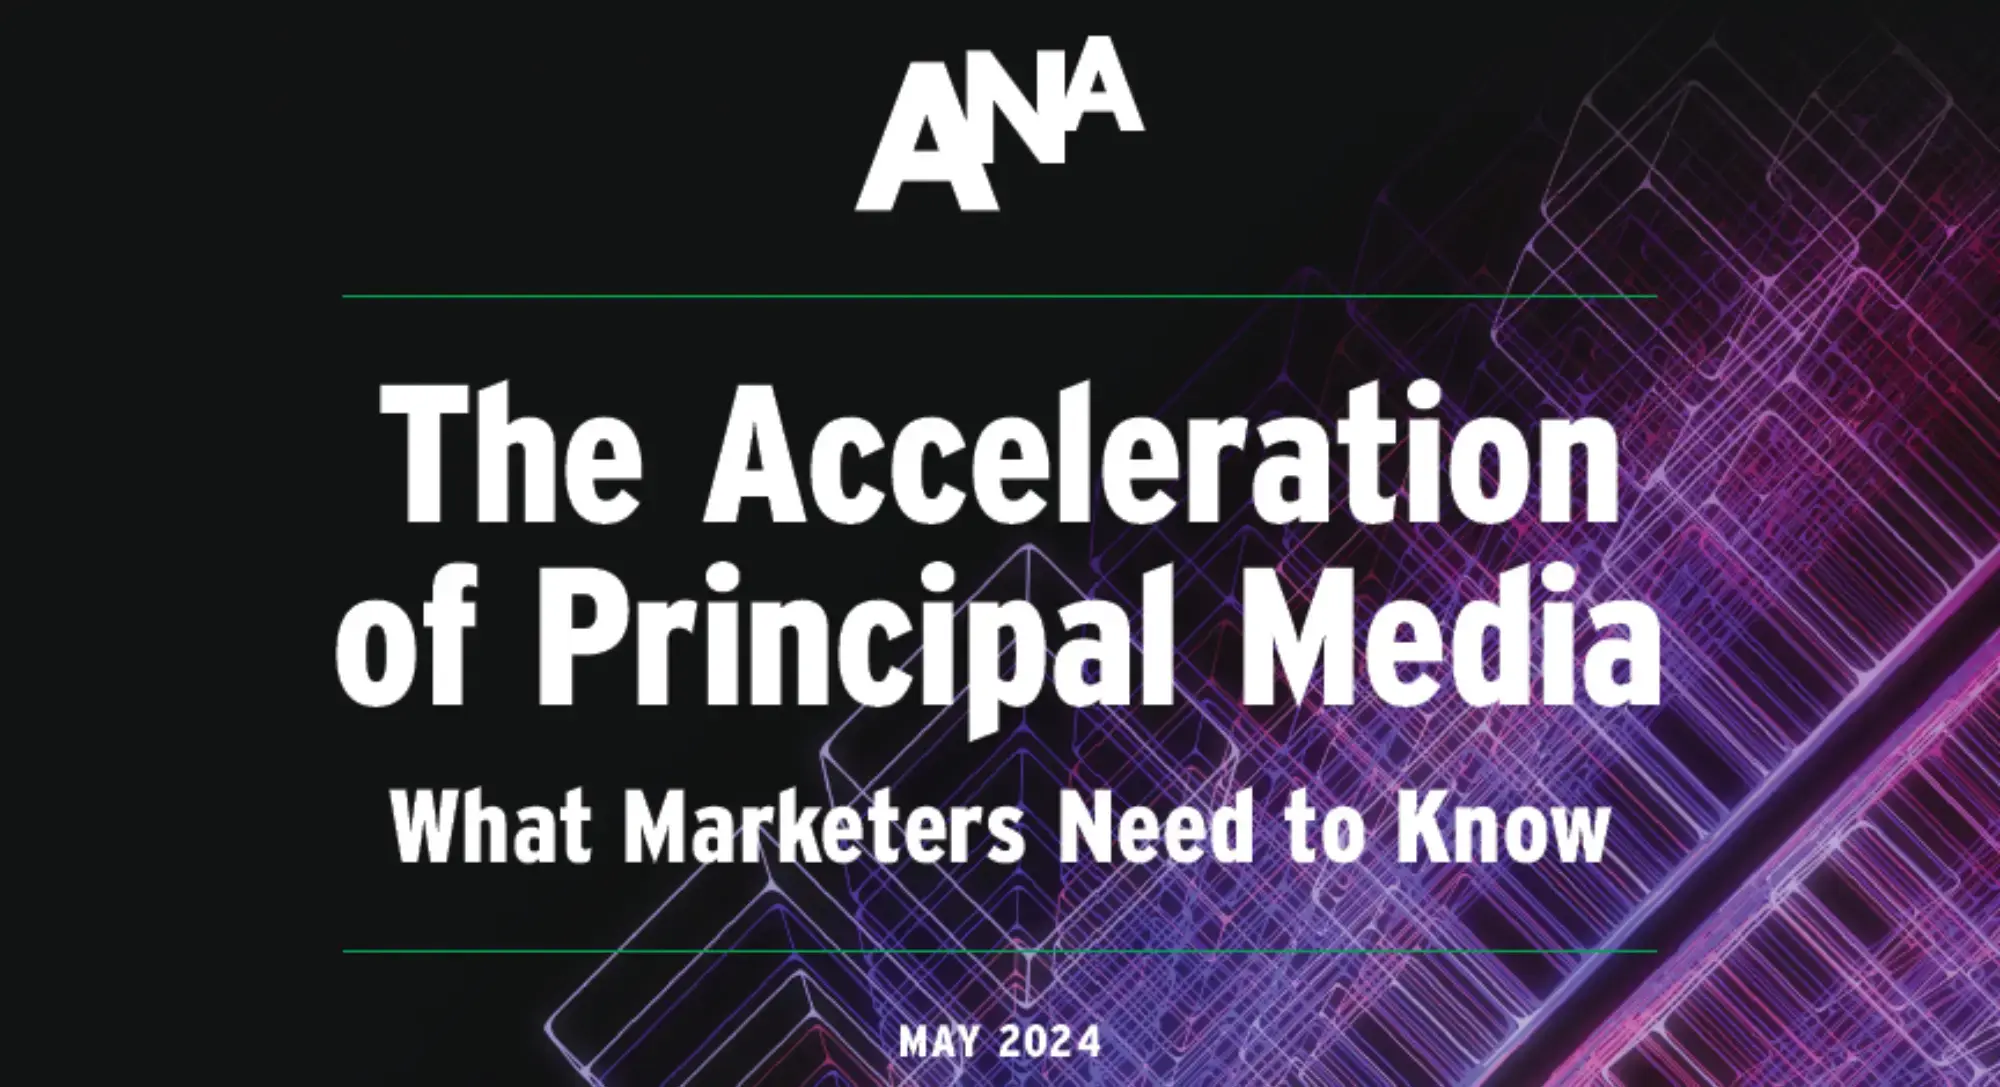 Principal Media Study: Key Findings and Abintus Recommendations